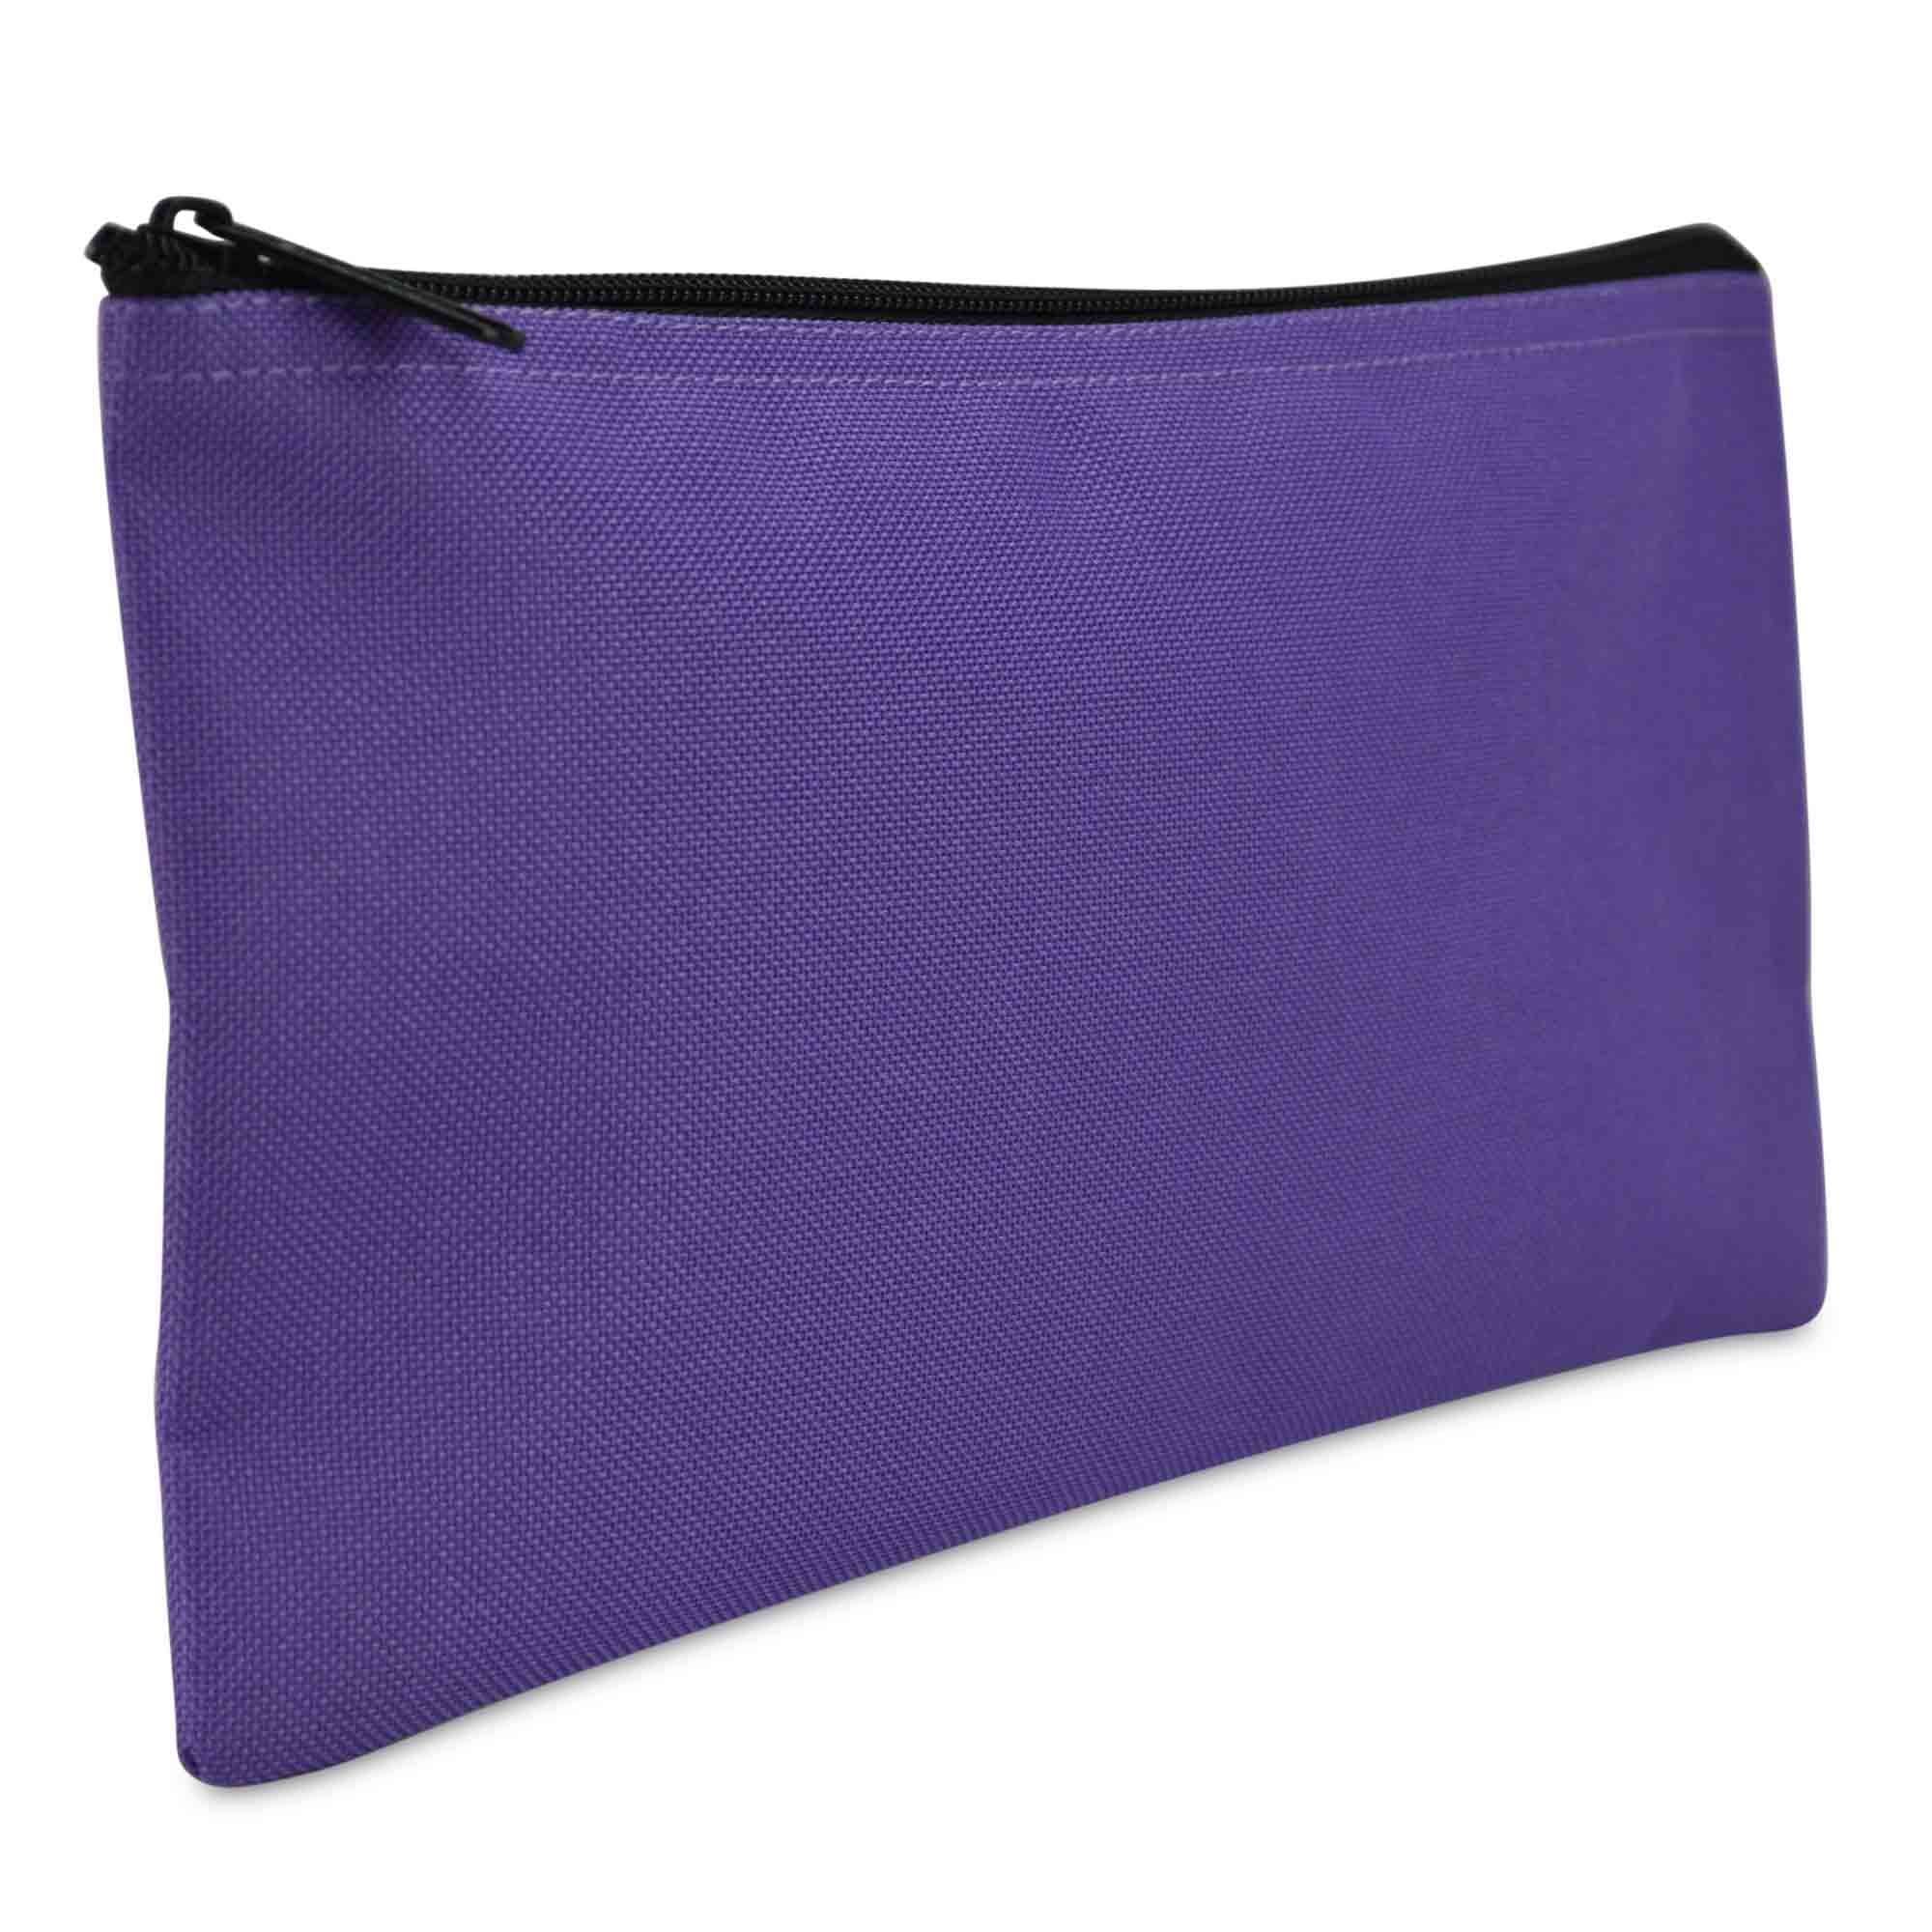 DALIX Bank Bags Money Pouch Security Deposit Utility Zipper Coin Bag in Purple - 0 ...